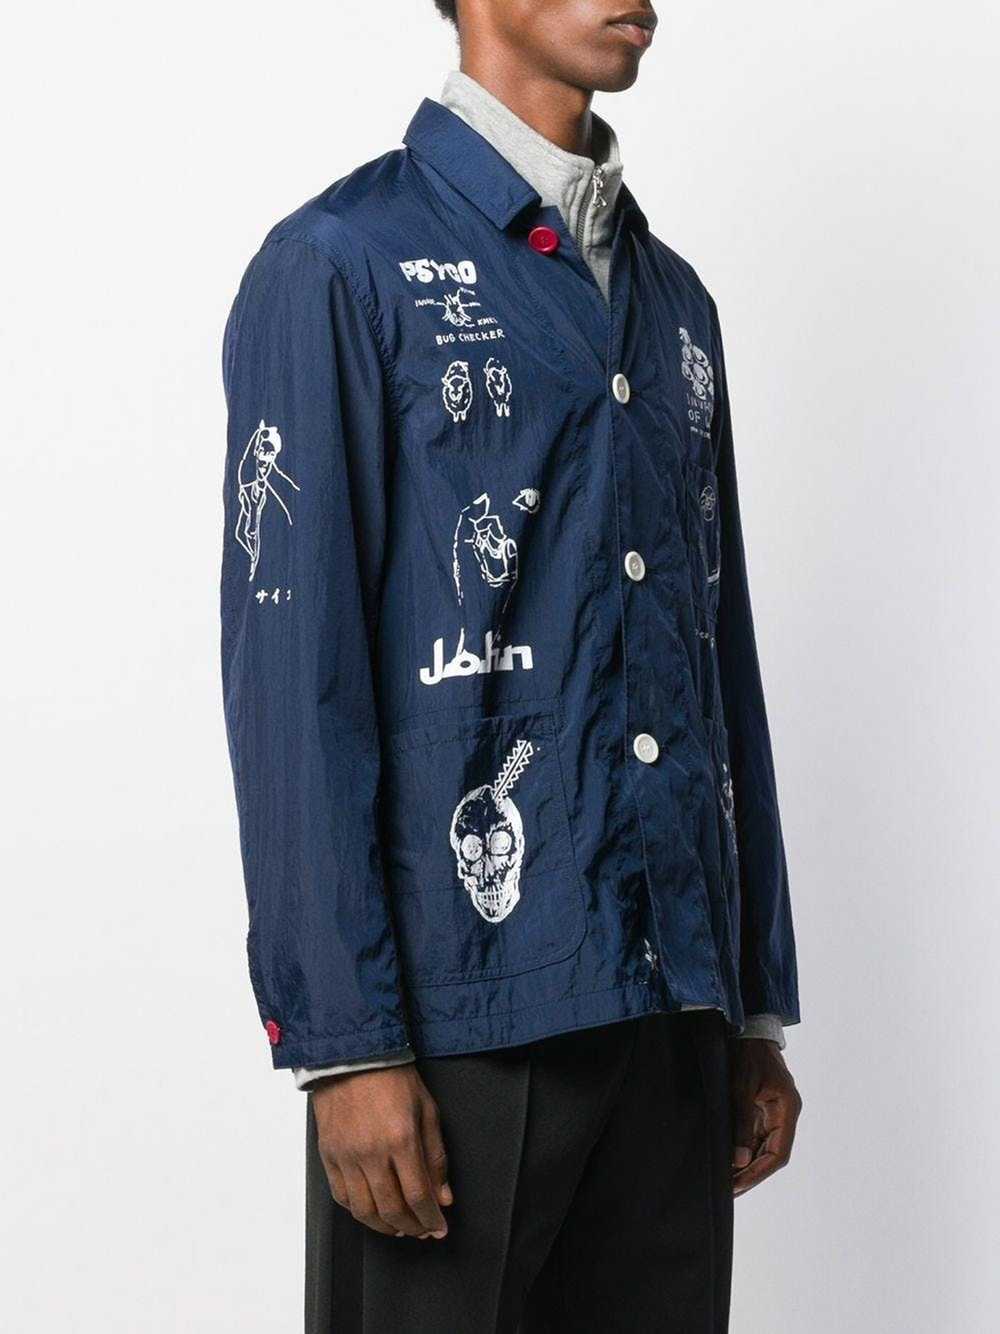 Undercover SS20 Bug Coach Jacket - image 8